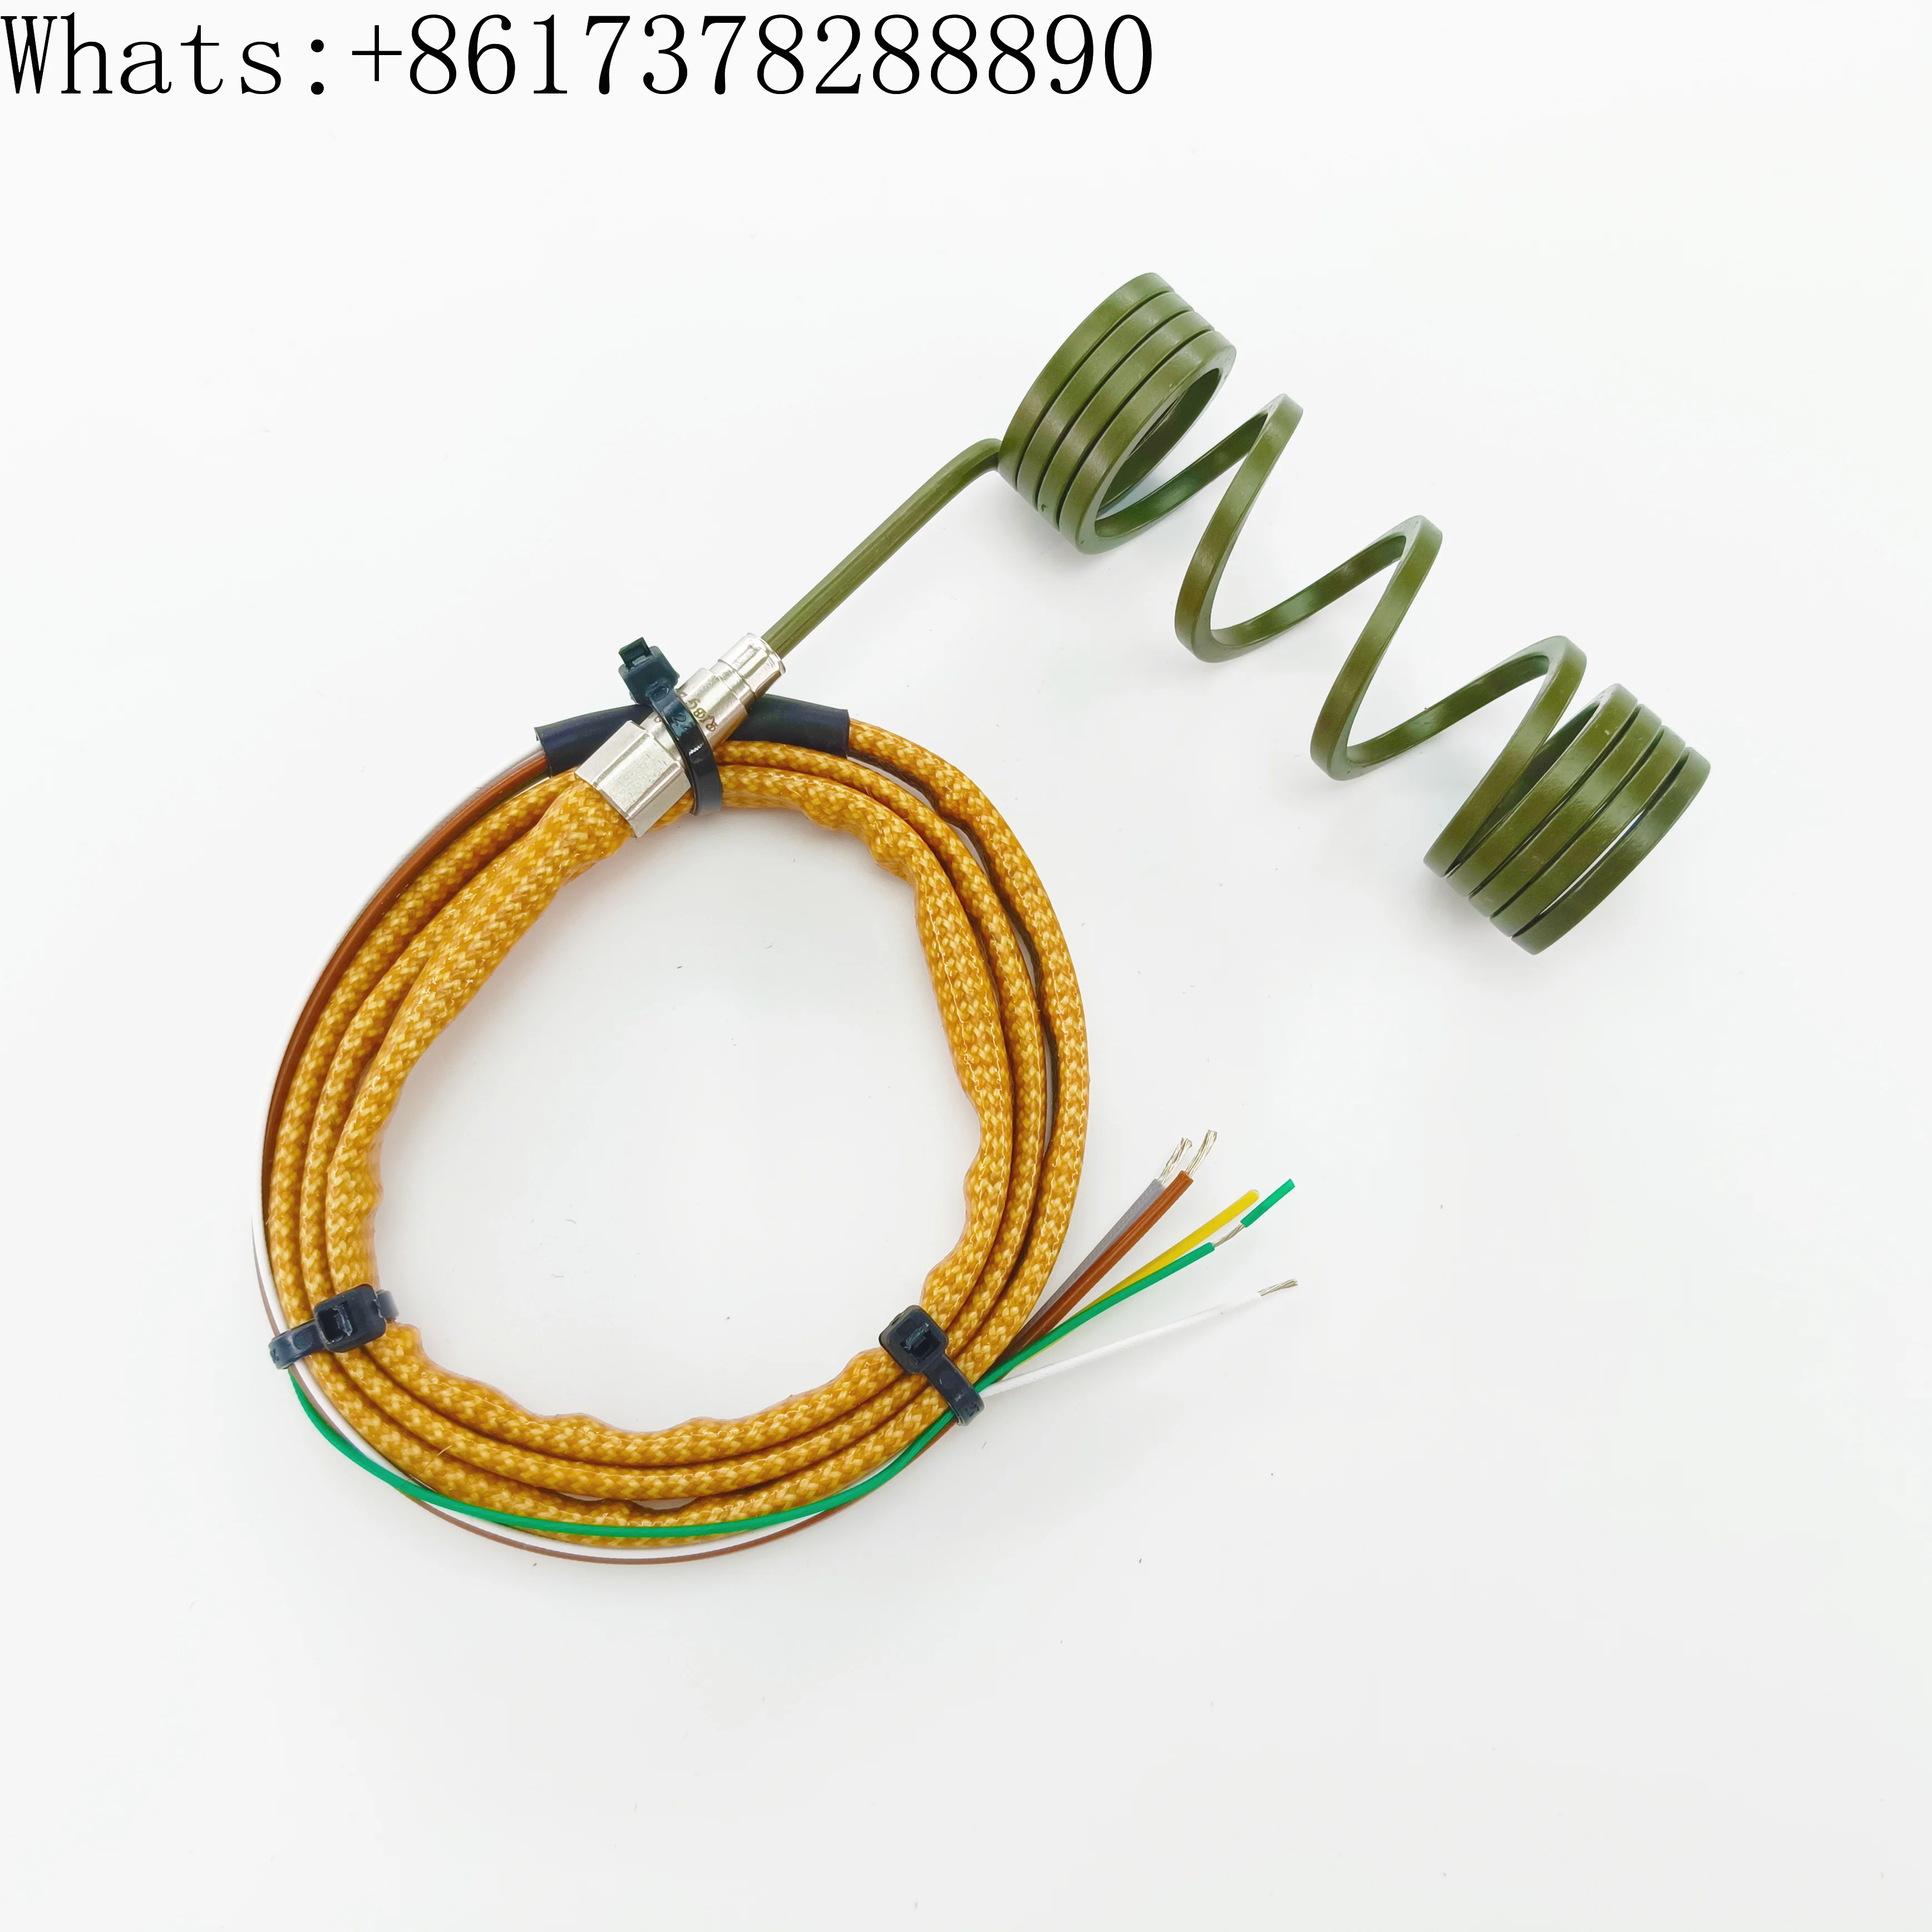 

22mm diameter high-temperature hot runner coil spring heating coil bottle cap mold electric coil mold green heating wire